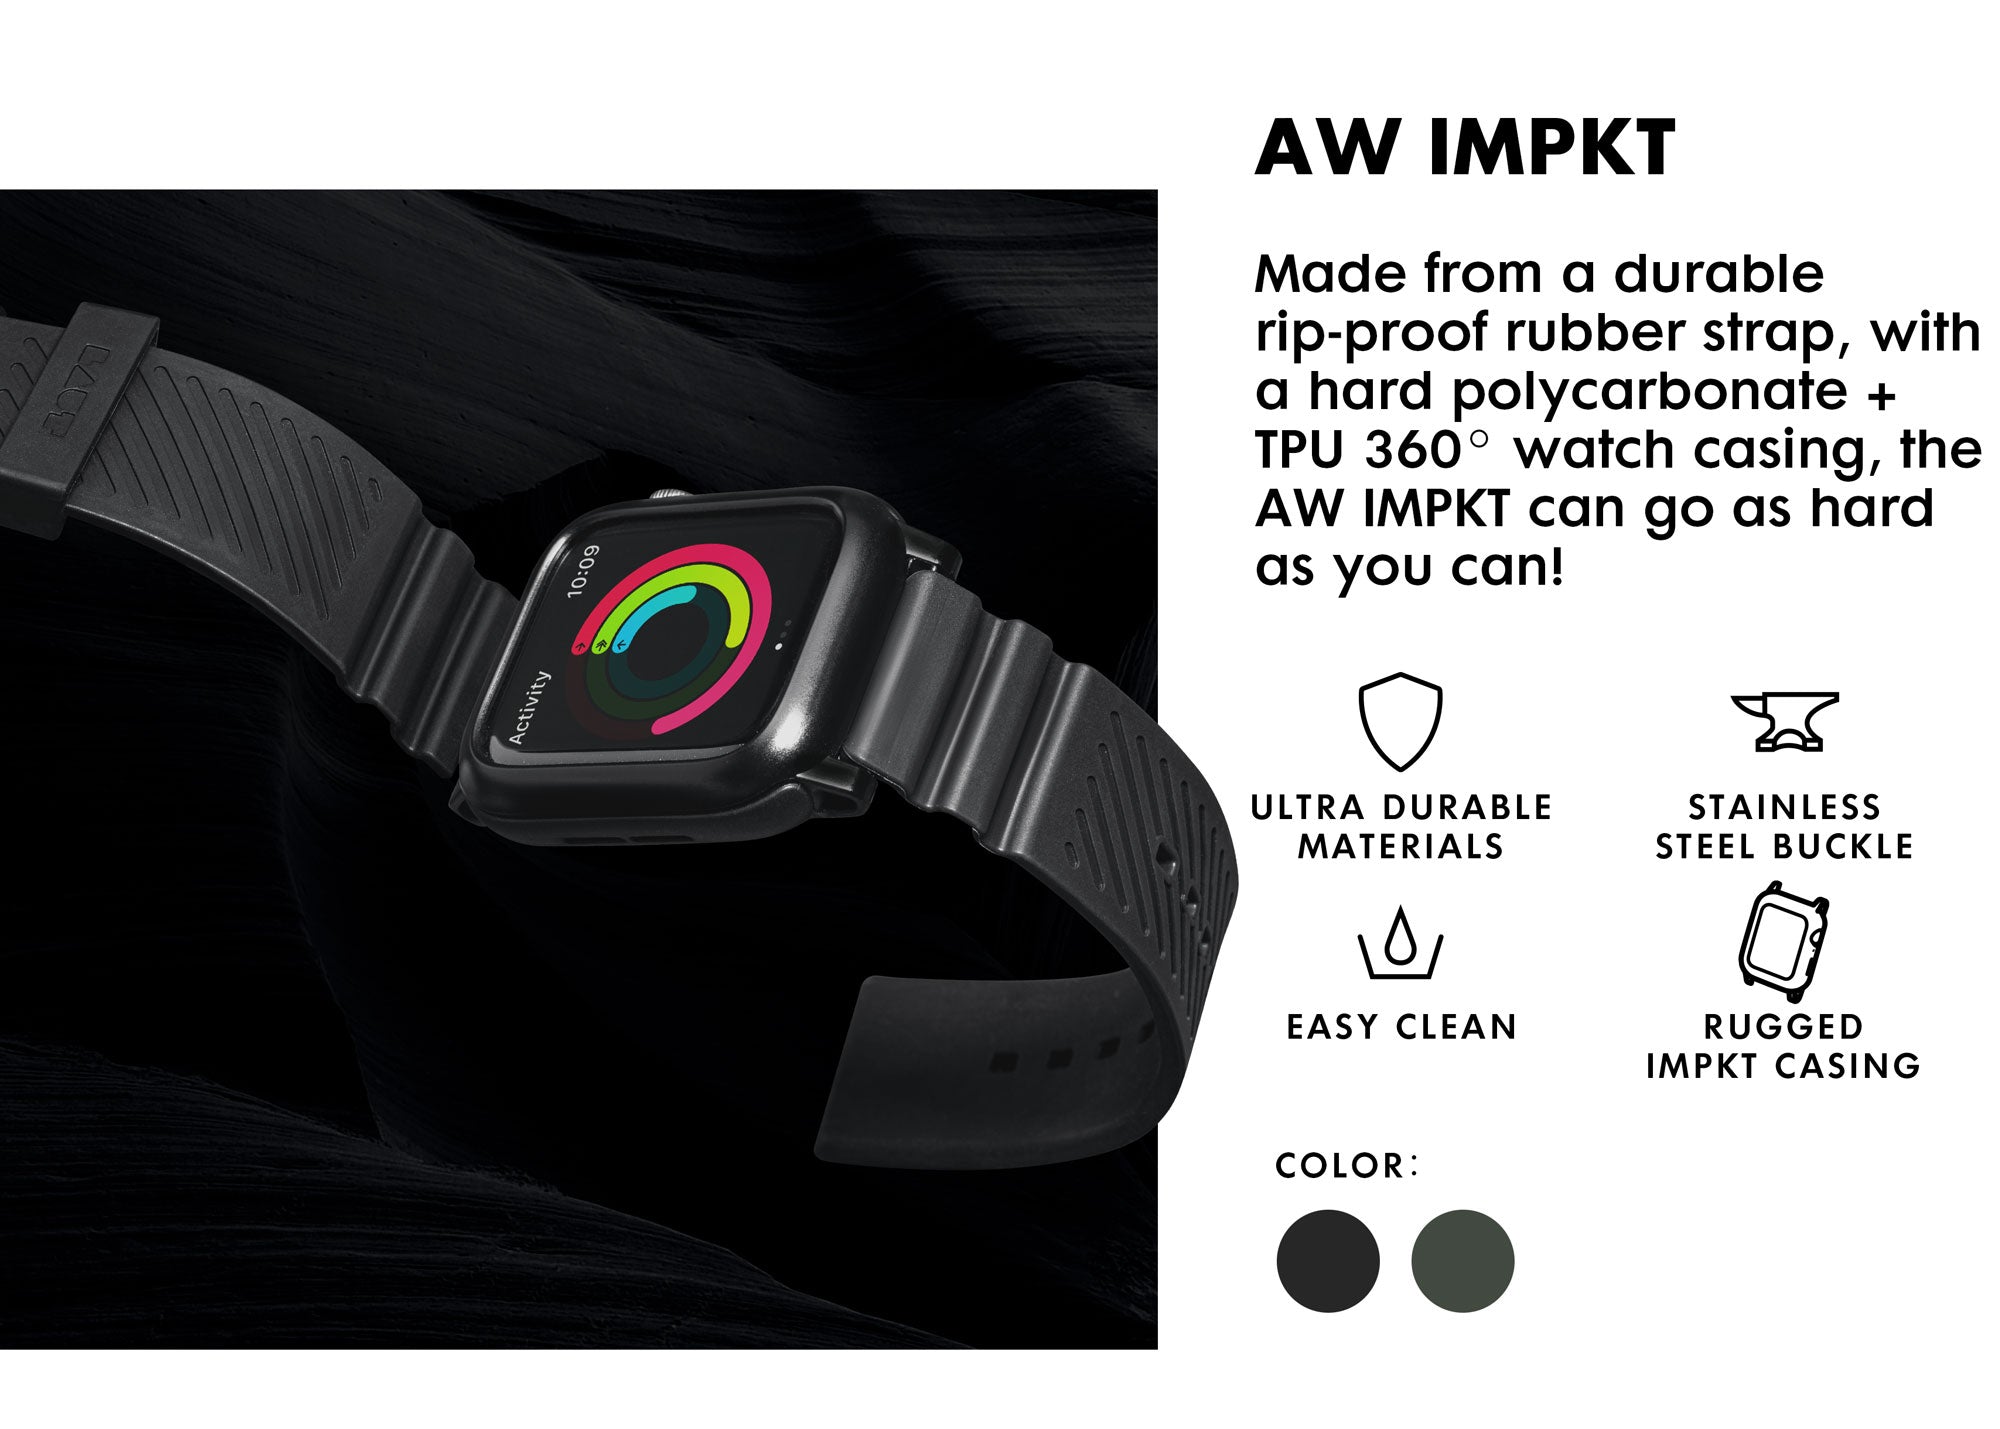 LAUT AW IMPKT for Apple Watch - built to do one thing, and one thing only - survive. Made from a durable rip-proof rubber strap, with a 360° hard polycarbonate and TPU watch casing, the AW IMPKT can go as hard as you can!